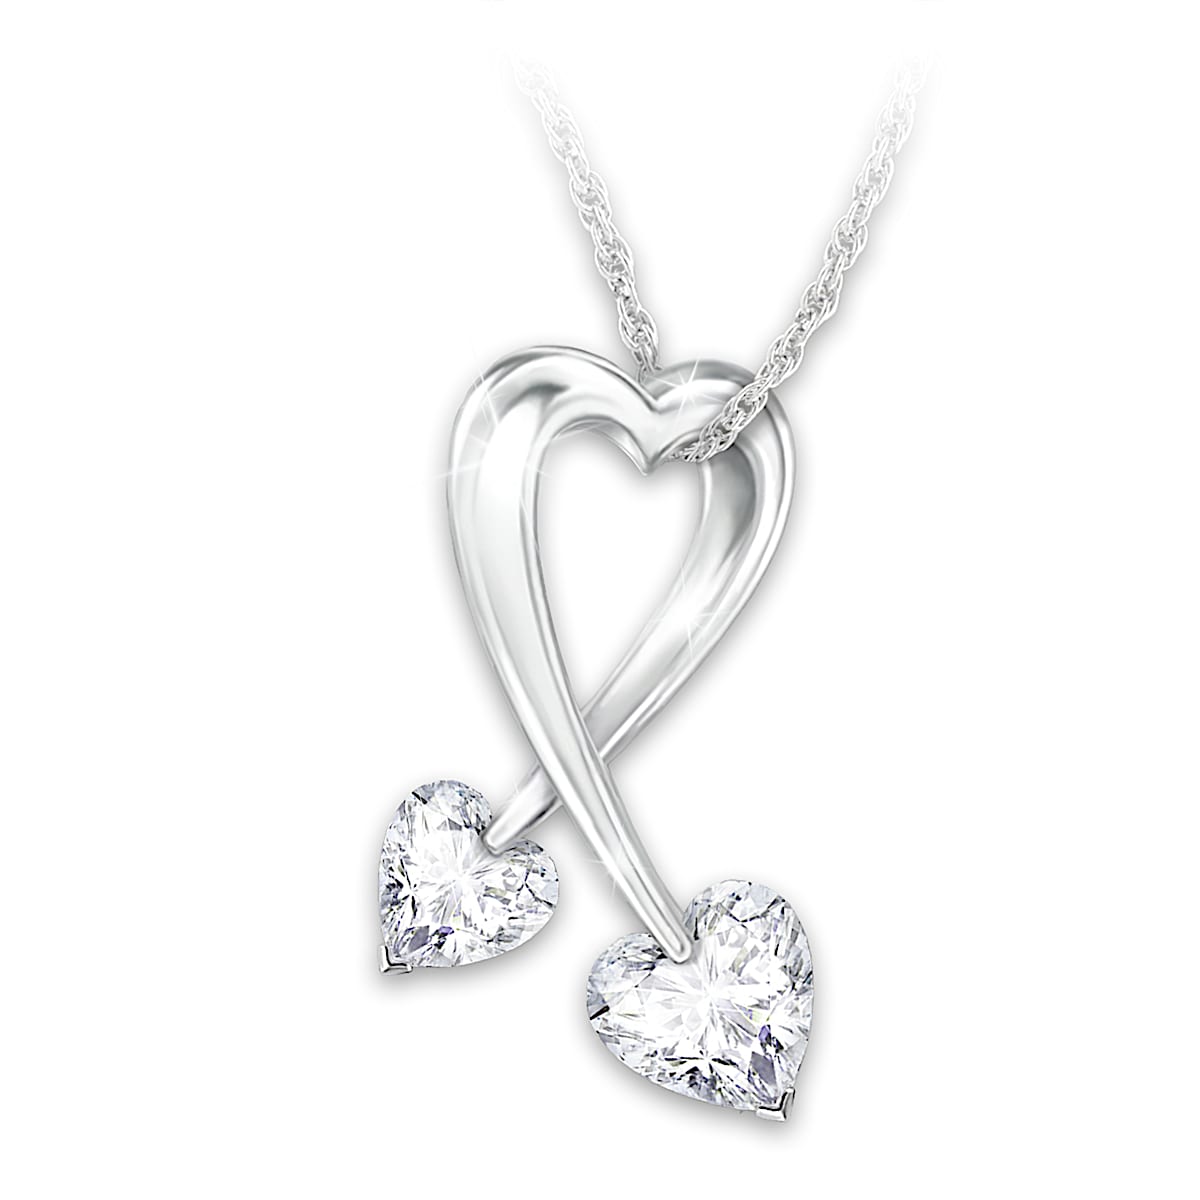 Mother Daughter Heart Necklace Set – The Silver Connection